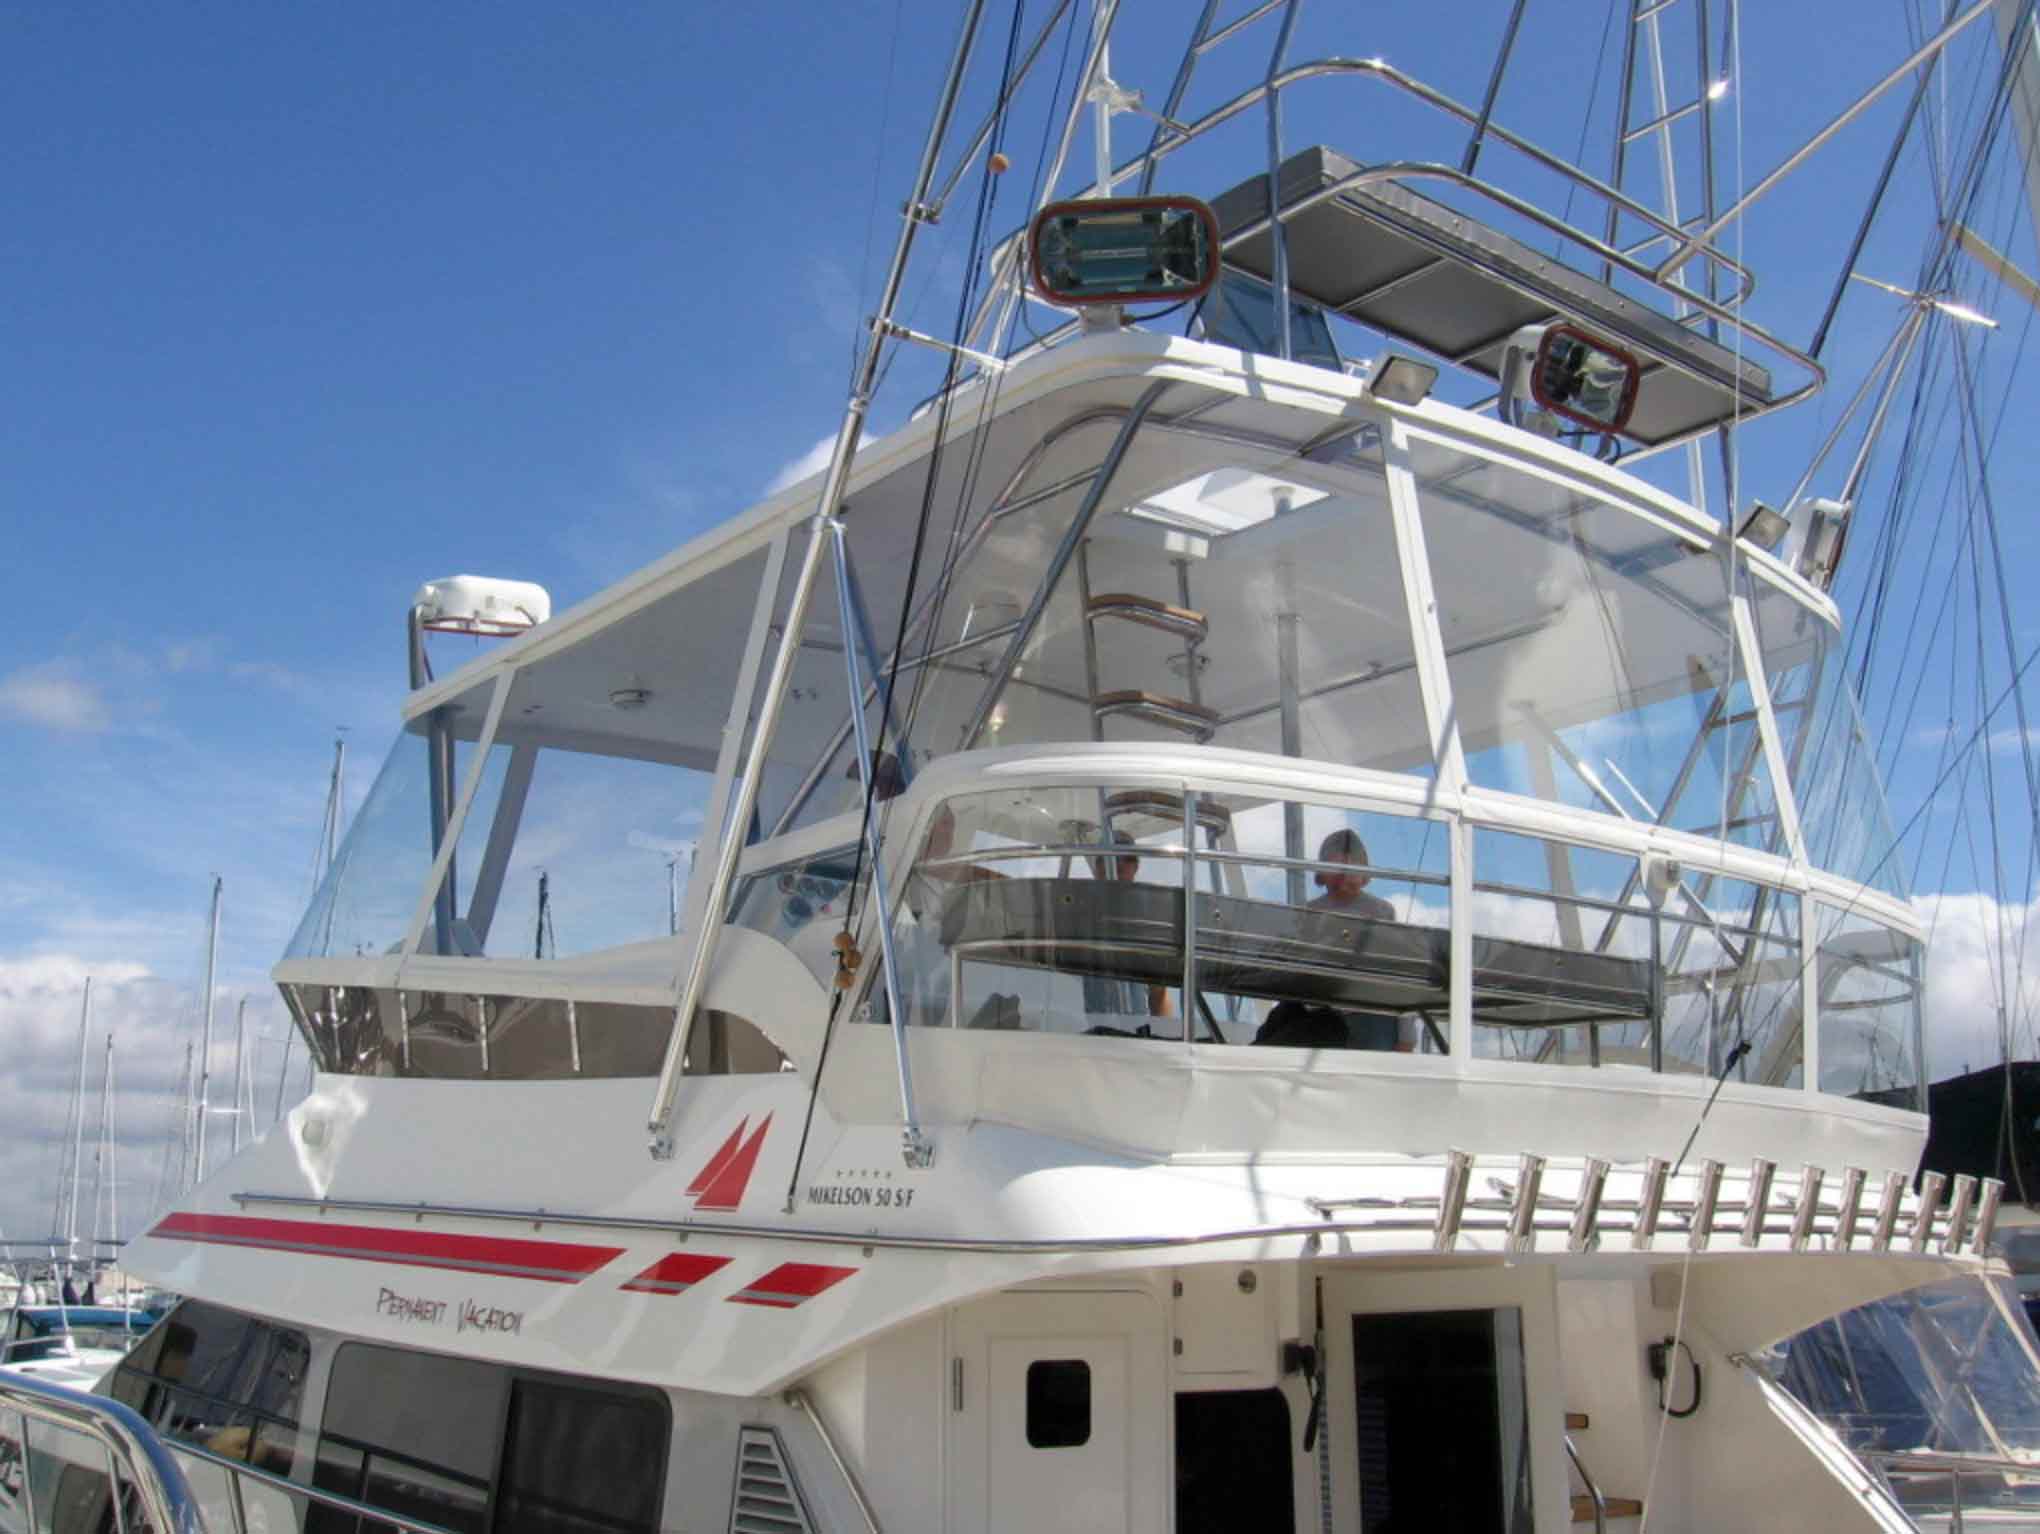 A fully enclosed flybridge on a 50ft power boat